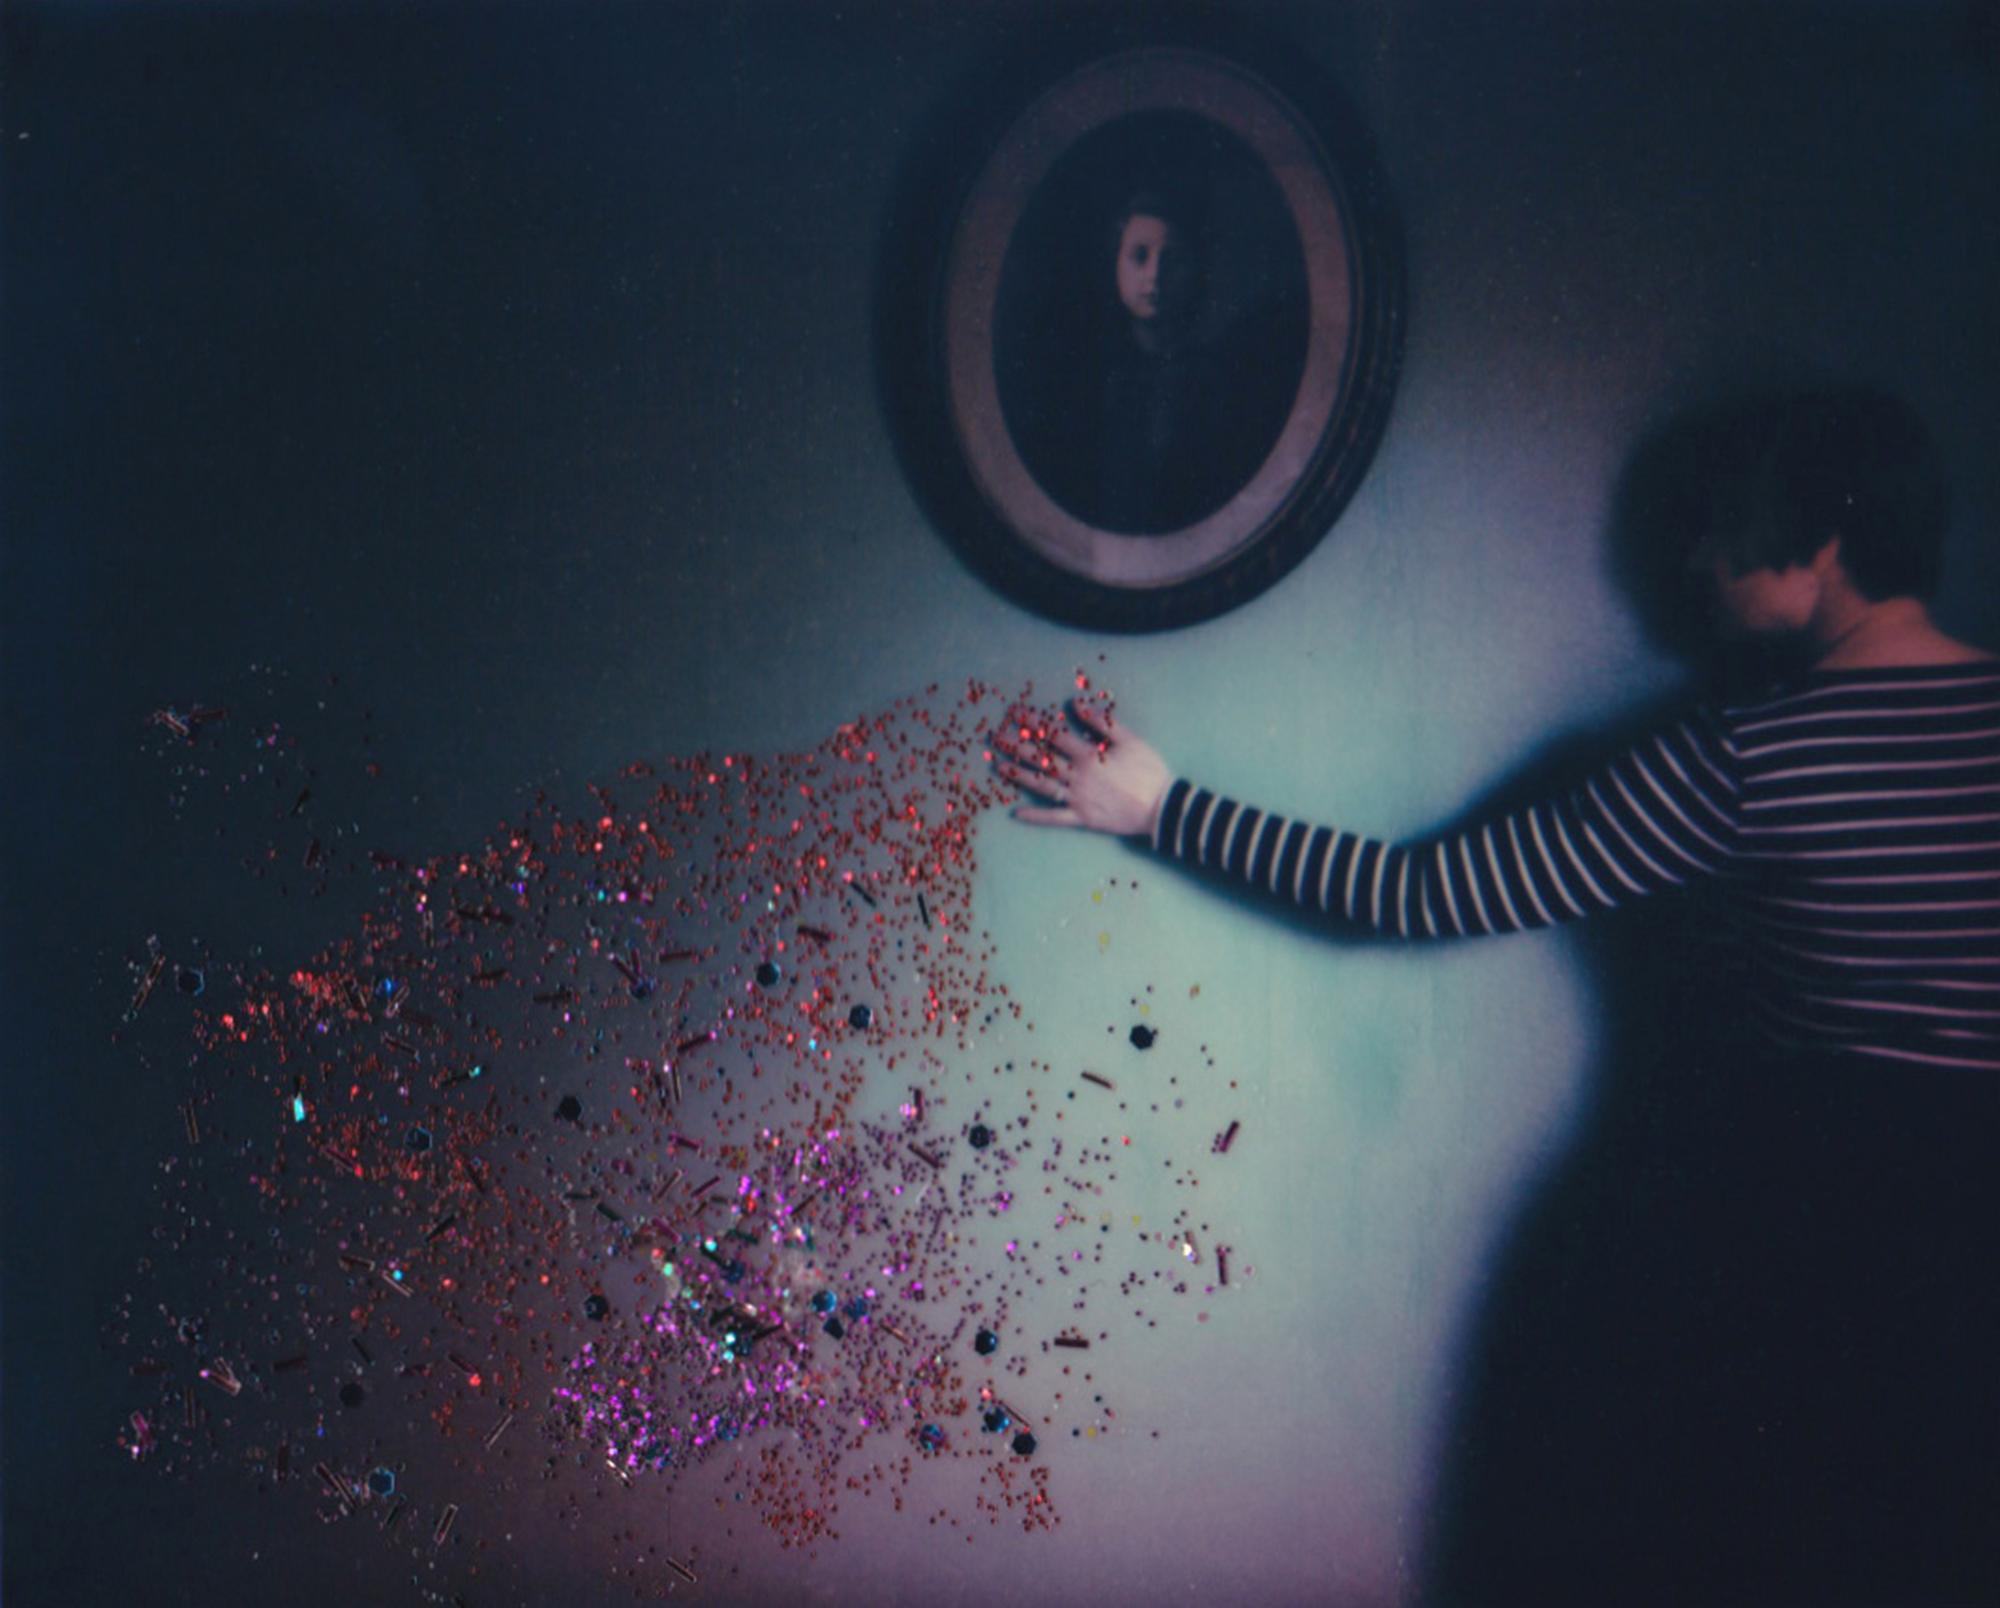 Lisa Toboz Color Photograph - Self-Distancing - Contemporary, Woman, Polaroid, Painting, flowers